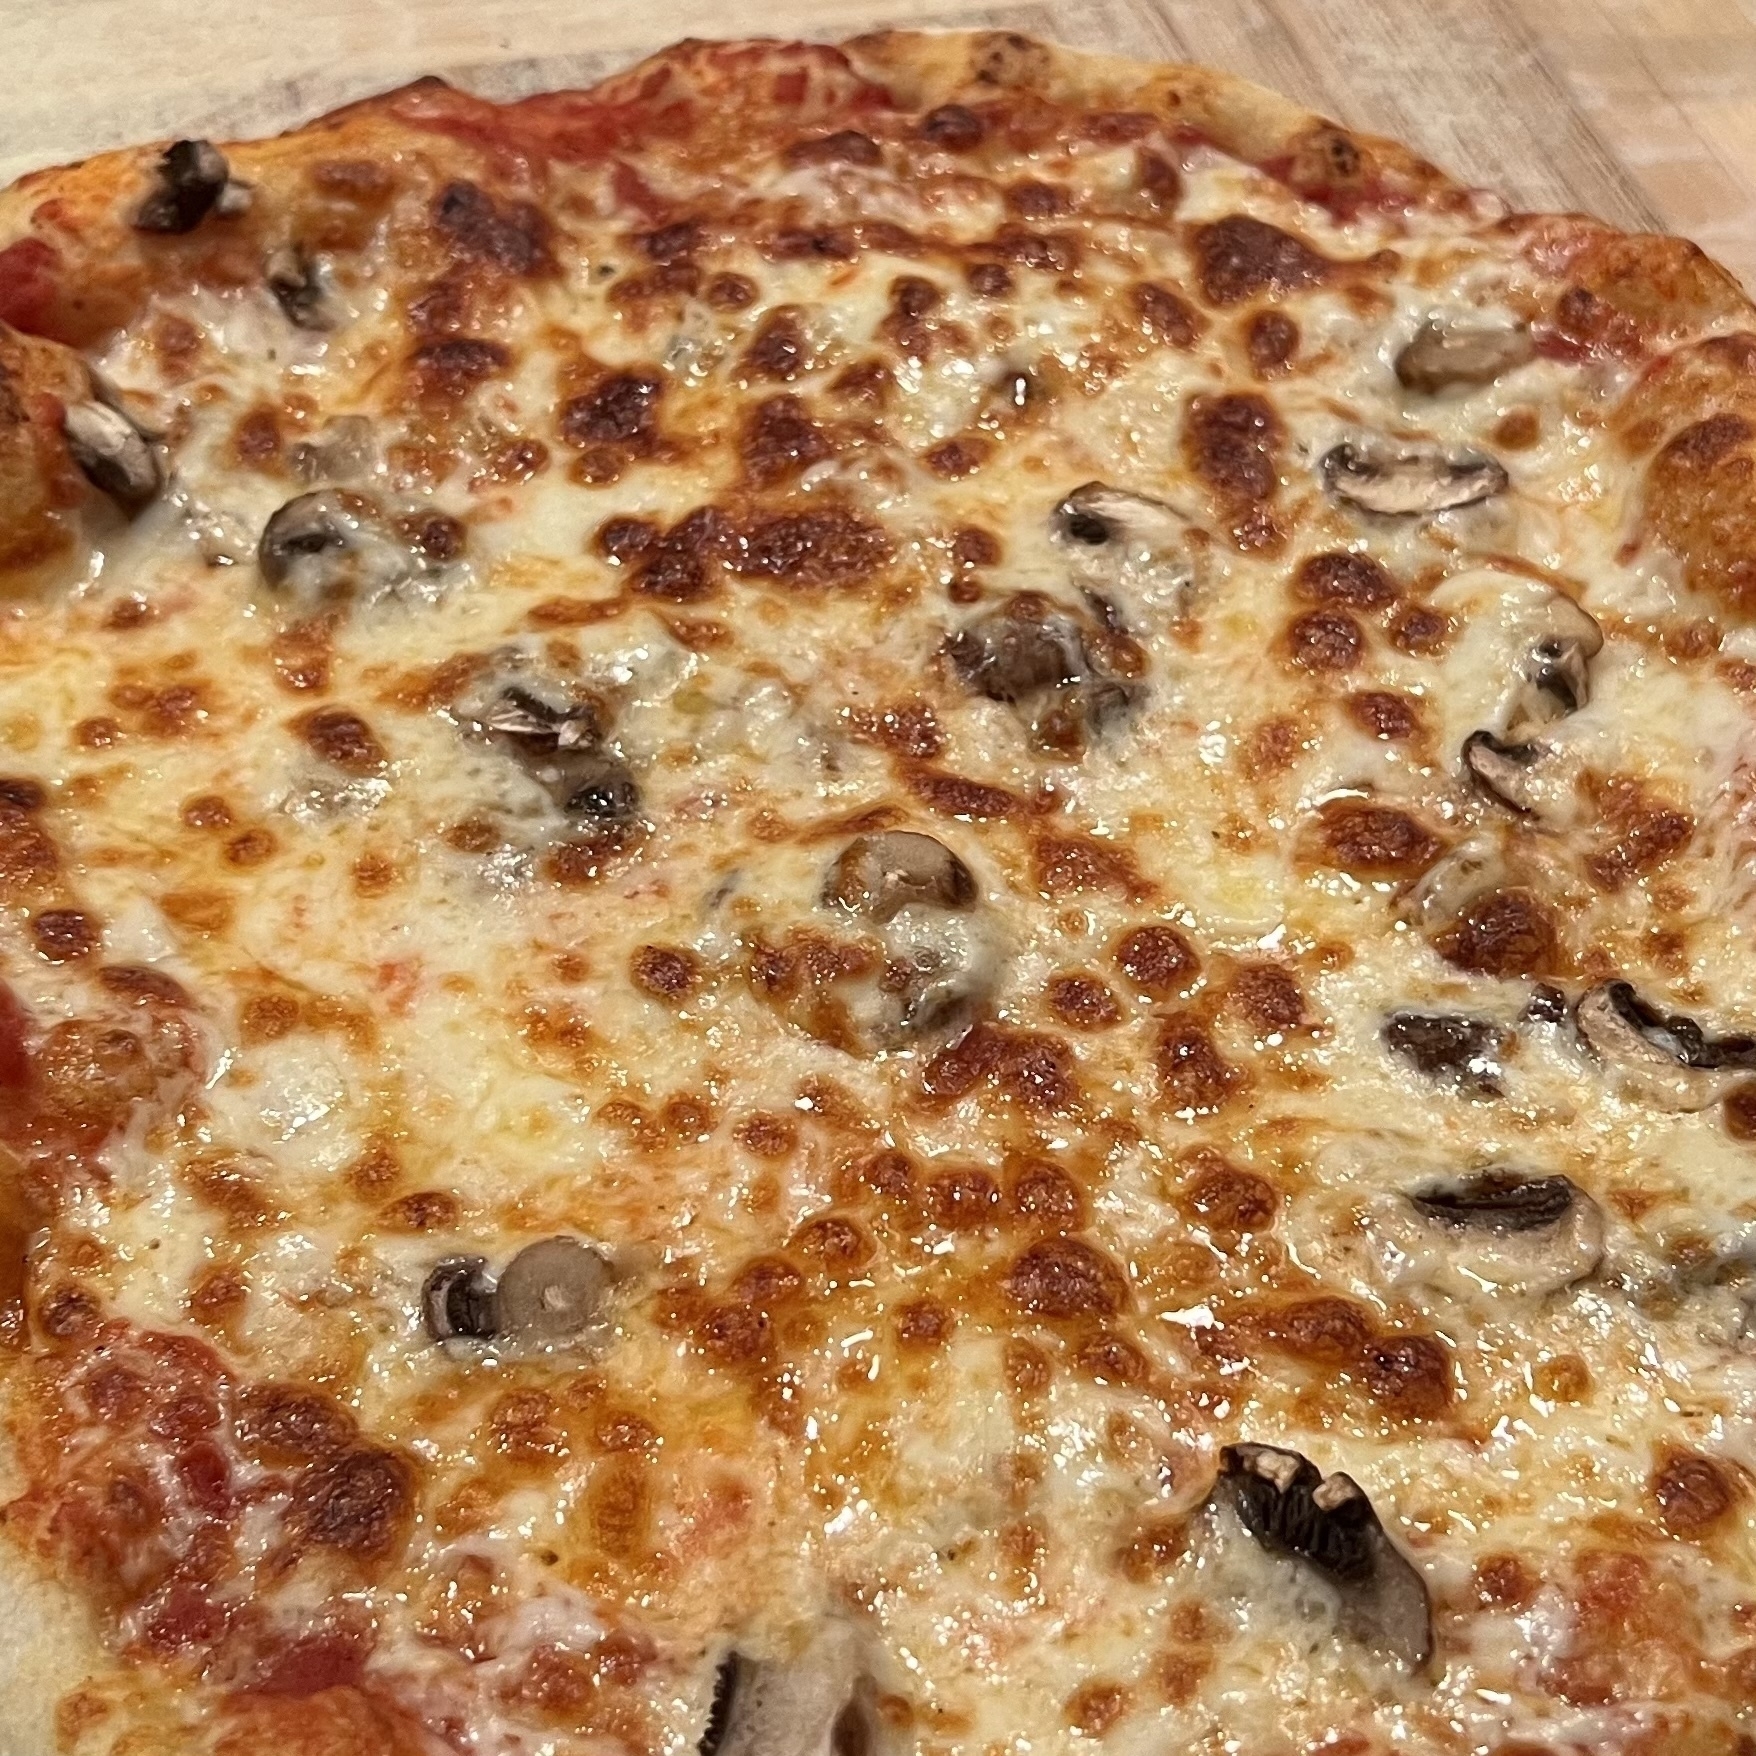 picture of a freshly baked hinemade pizza with tomato sauce, cheese, and mushrooms